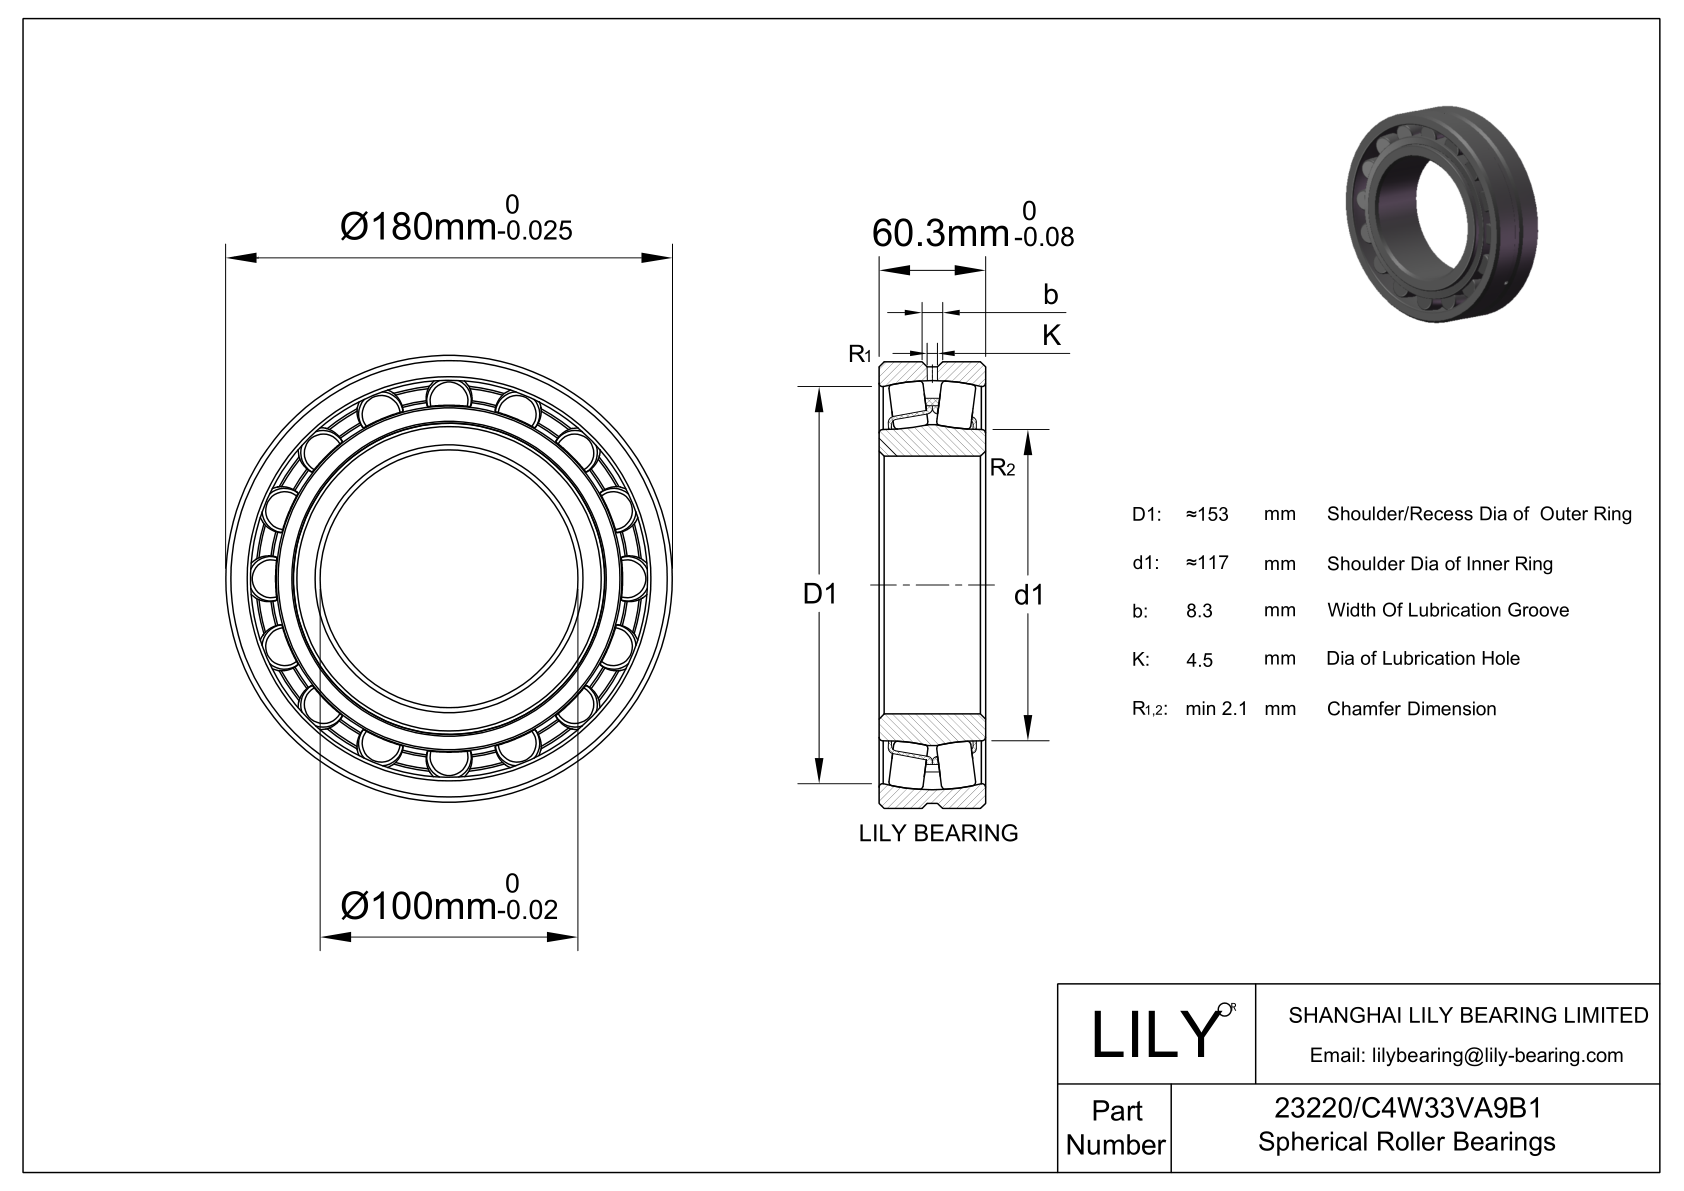 23220/C4W33VA9B1 Double Row Spherical Roller Bearing cad drawing